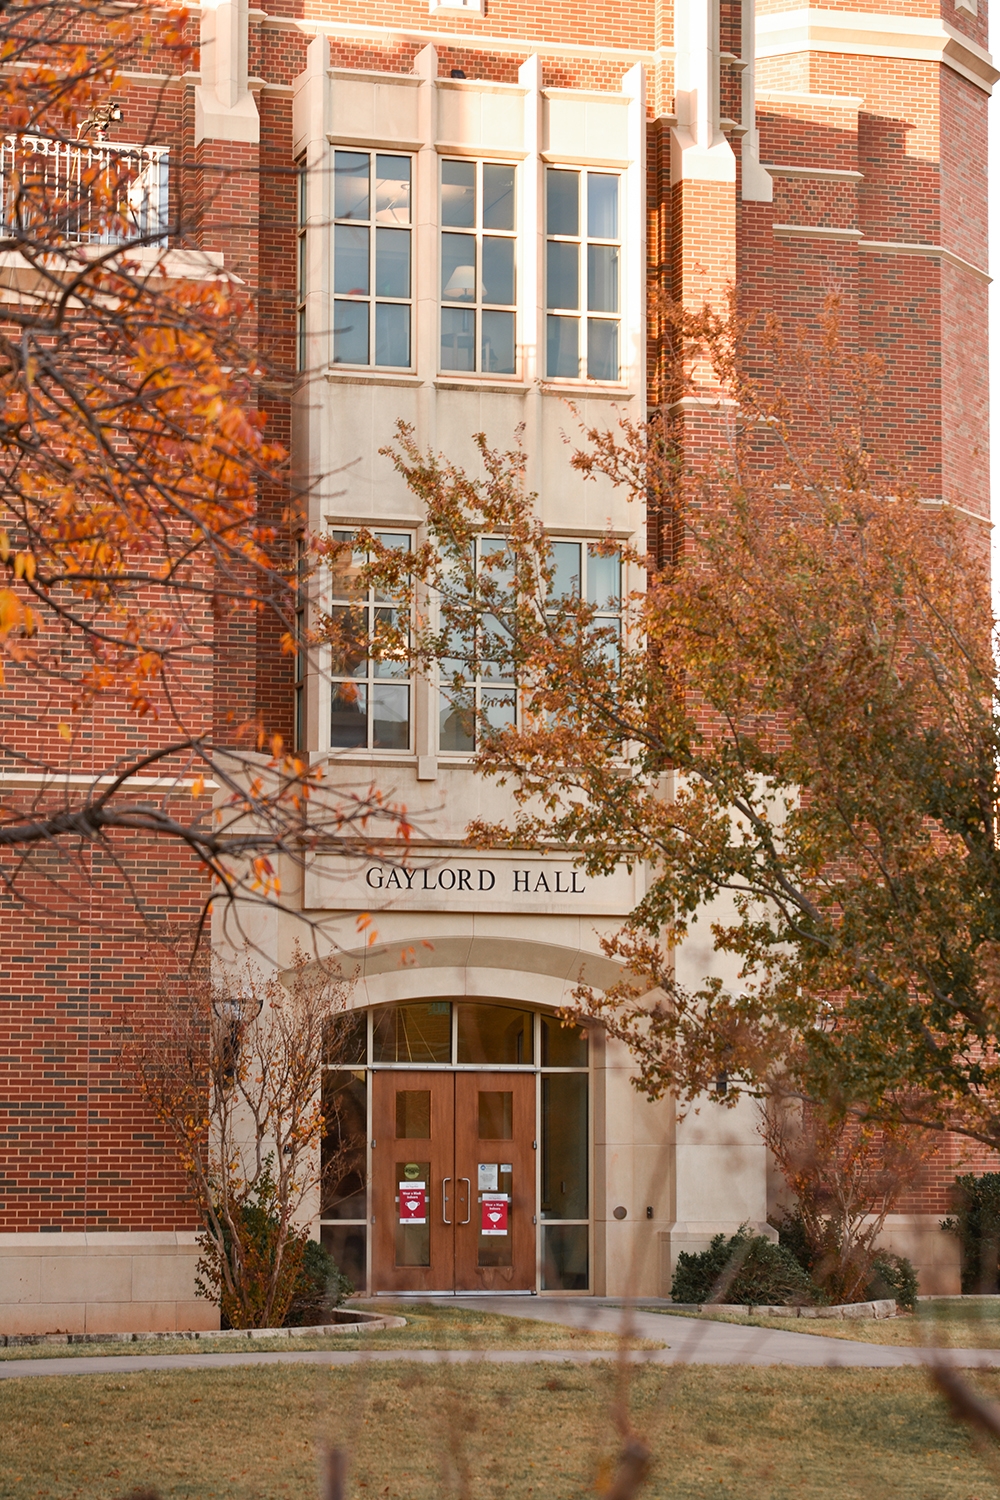 Gaylord Hall exterior building